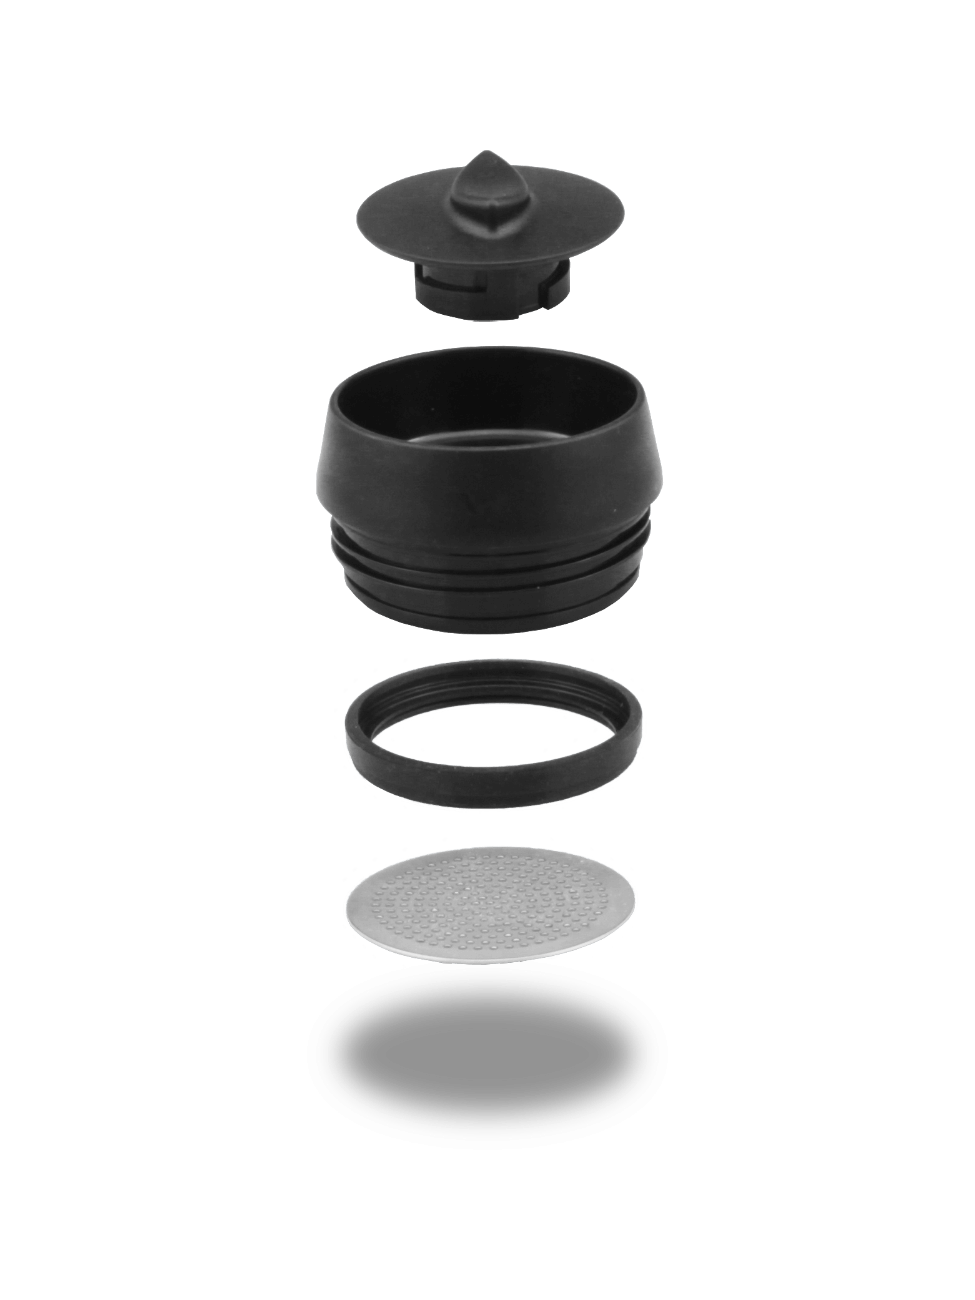 Exploded view of Ohelo coffee cup sip lid showing parts